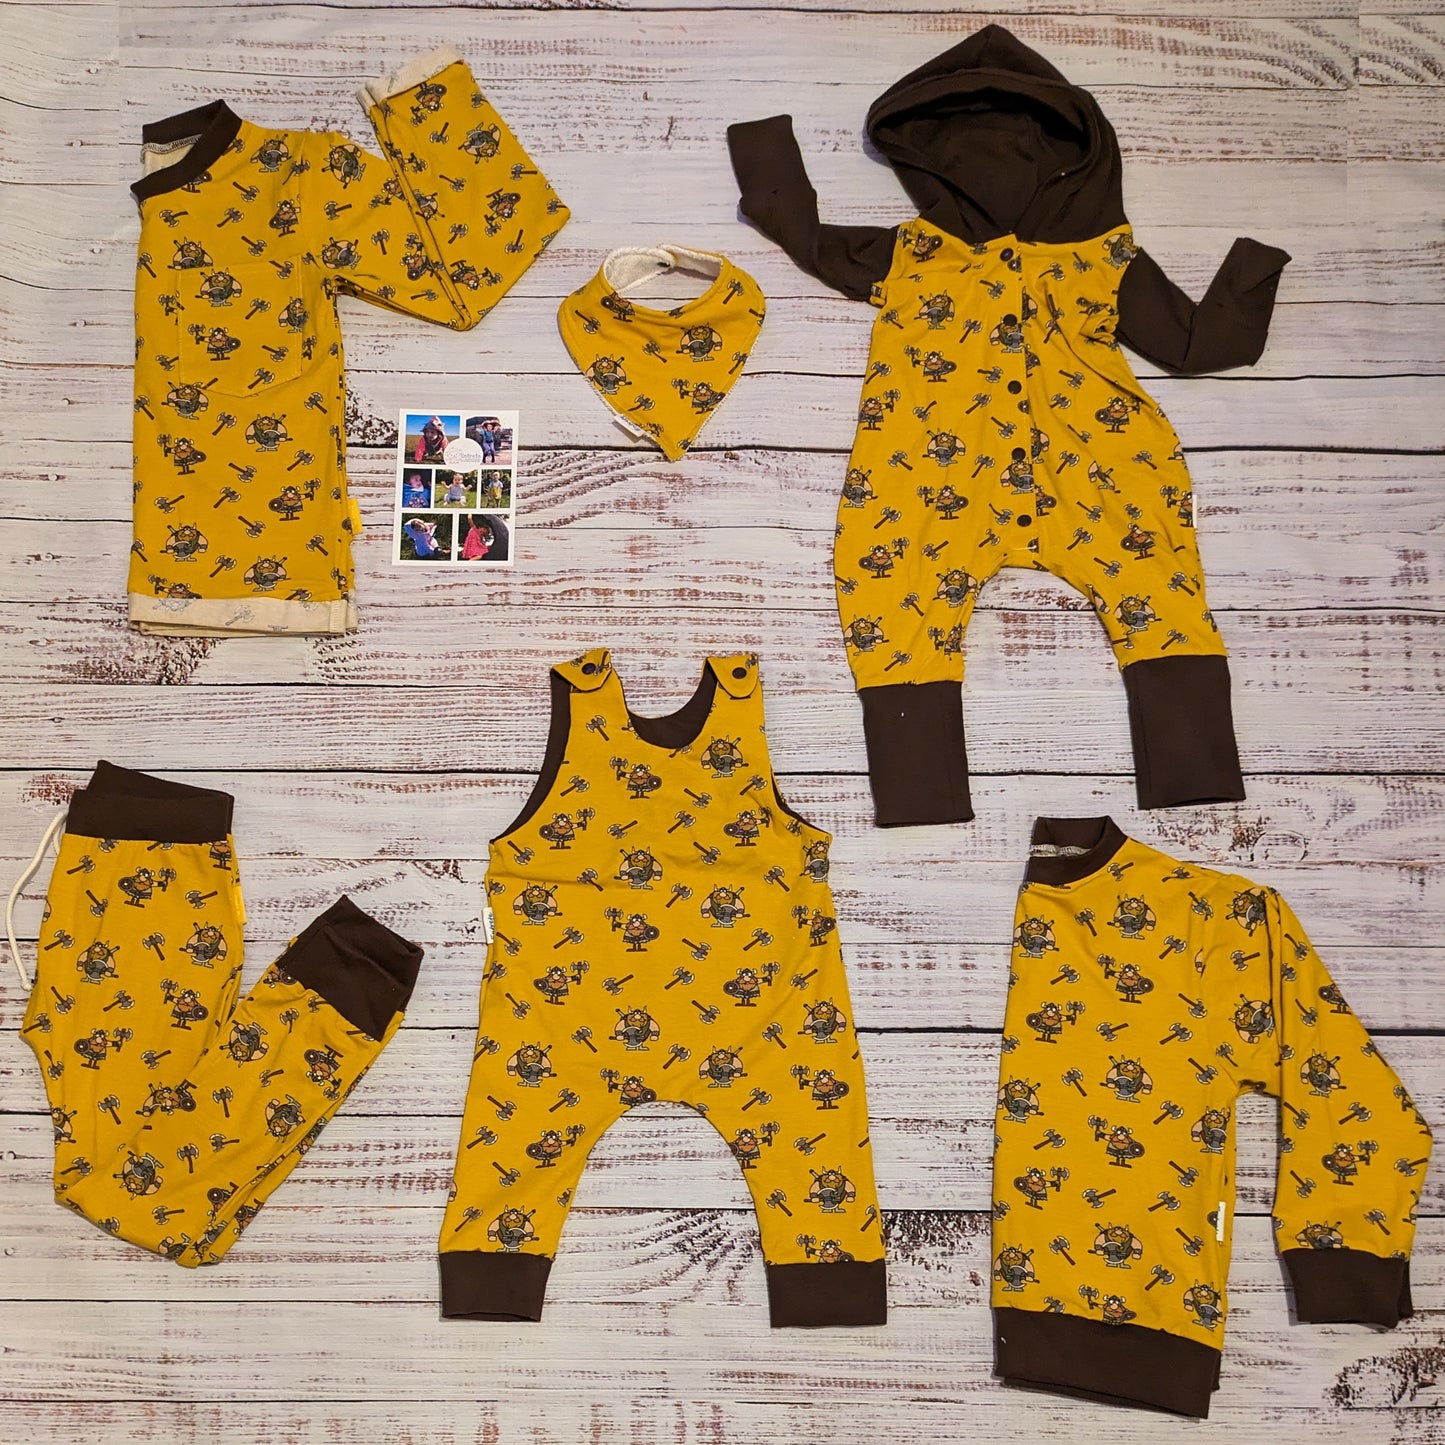 The mustard Vikings range from Entrete Kids. Including Rompers, harem pants, sweatshirts and tees. Just search mustard Vikings to see them all. 